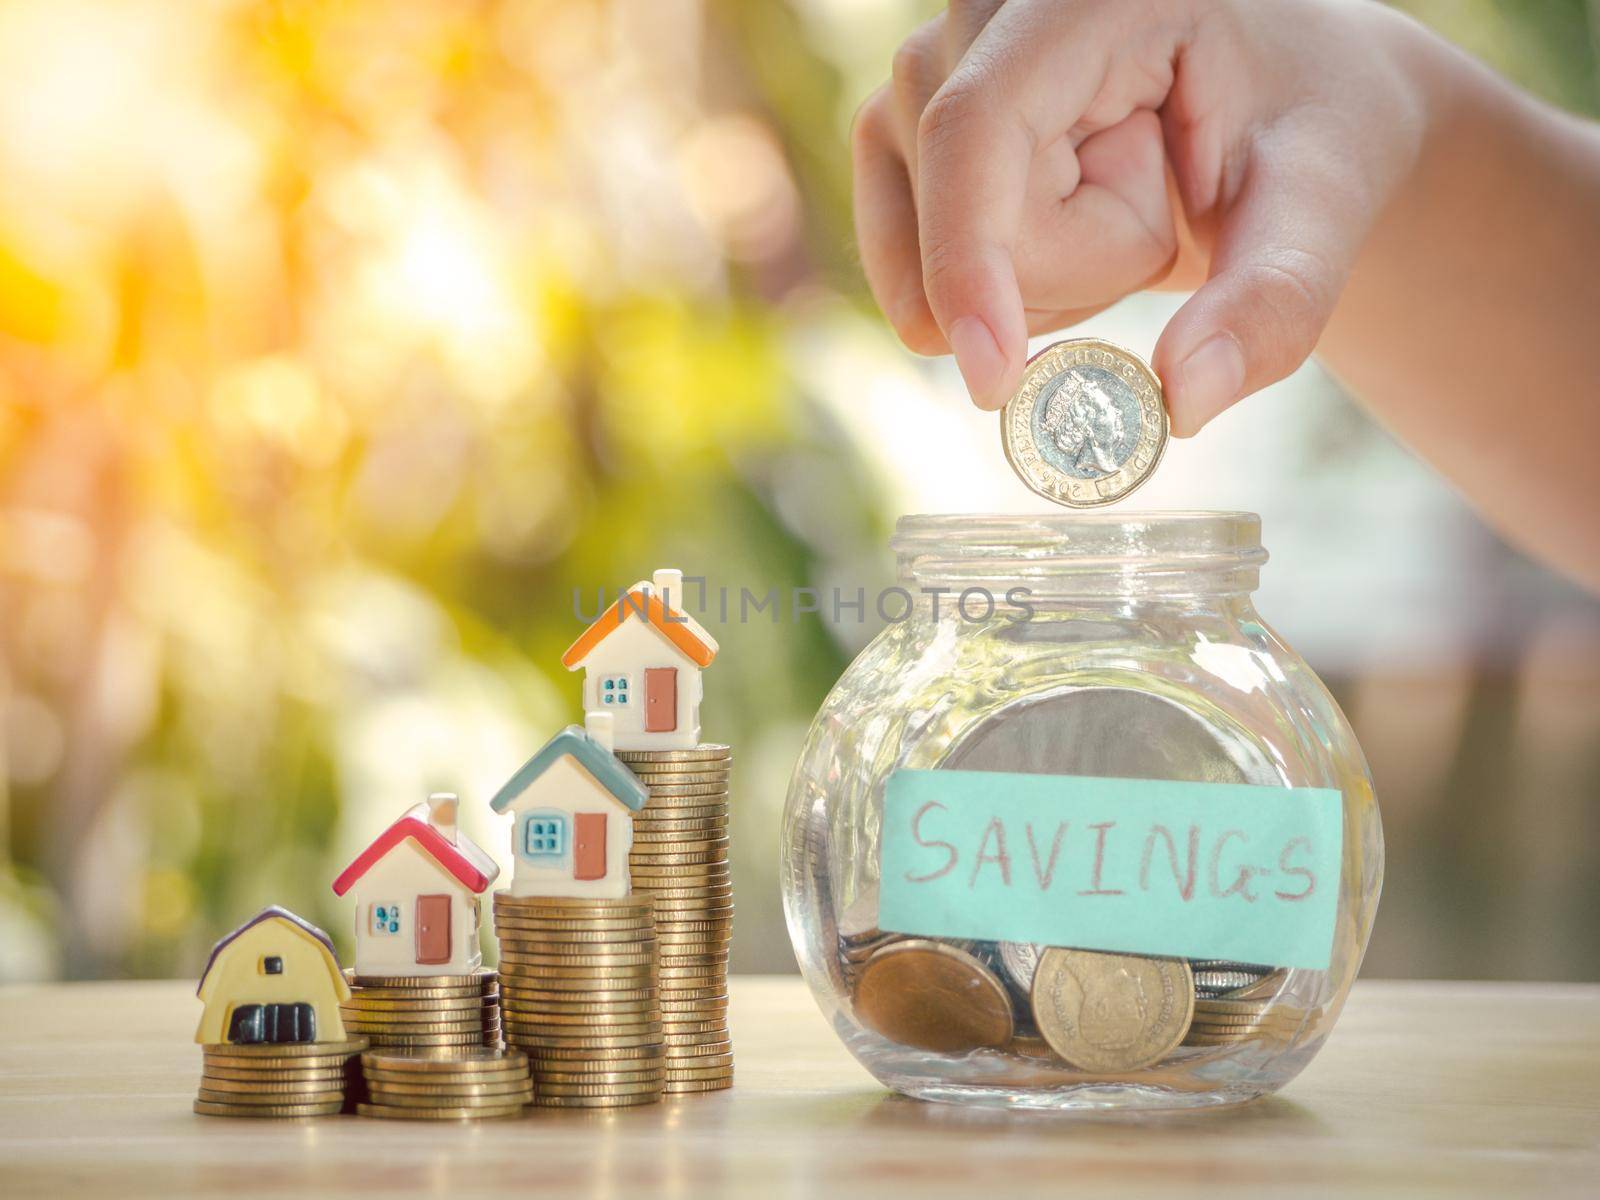 Asian boy holding coins drop a container saving money near home on gold coins stack to save money invest for future and buy home.Concept loan,property ladder,financial, real estate investment, bonus.